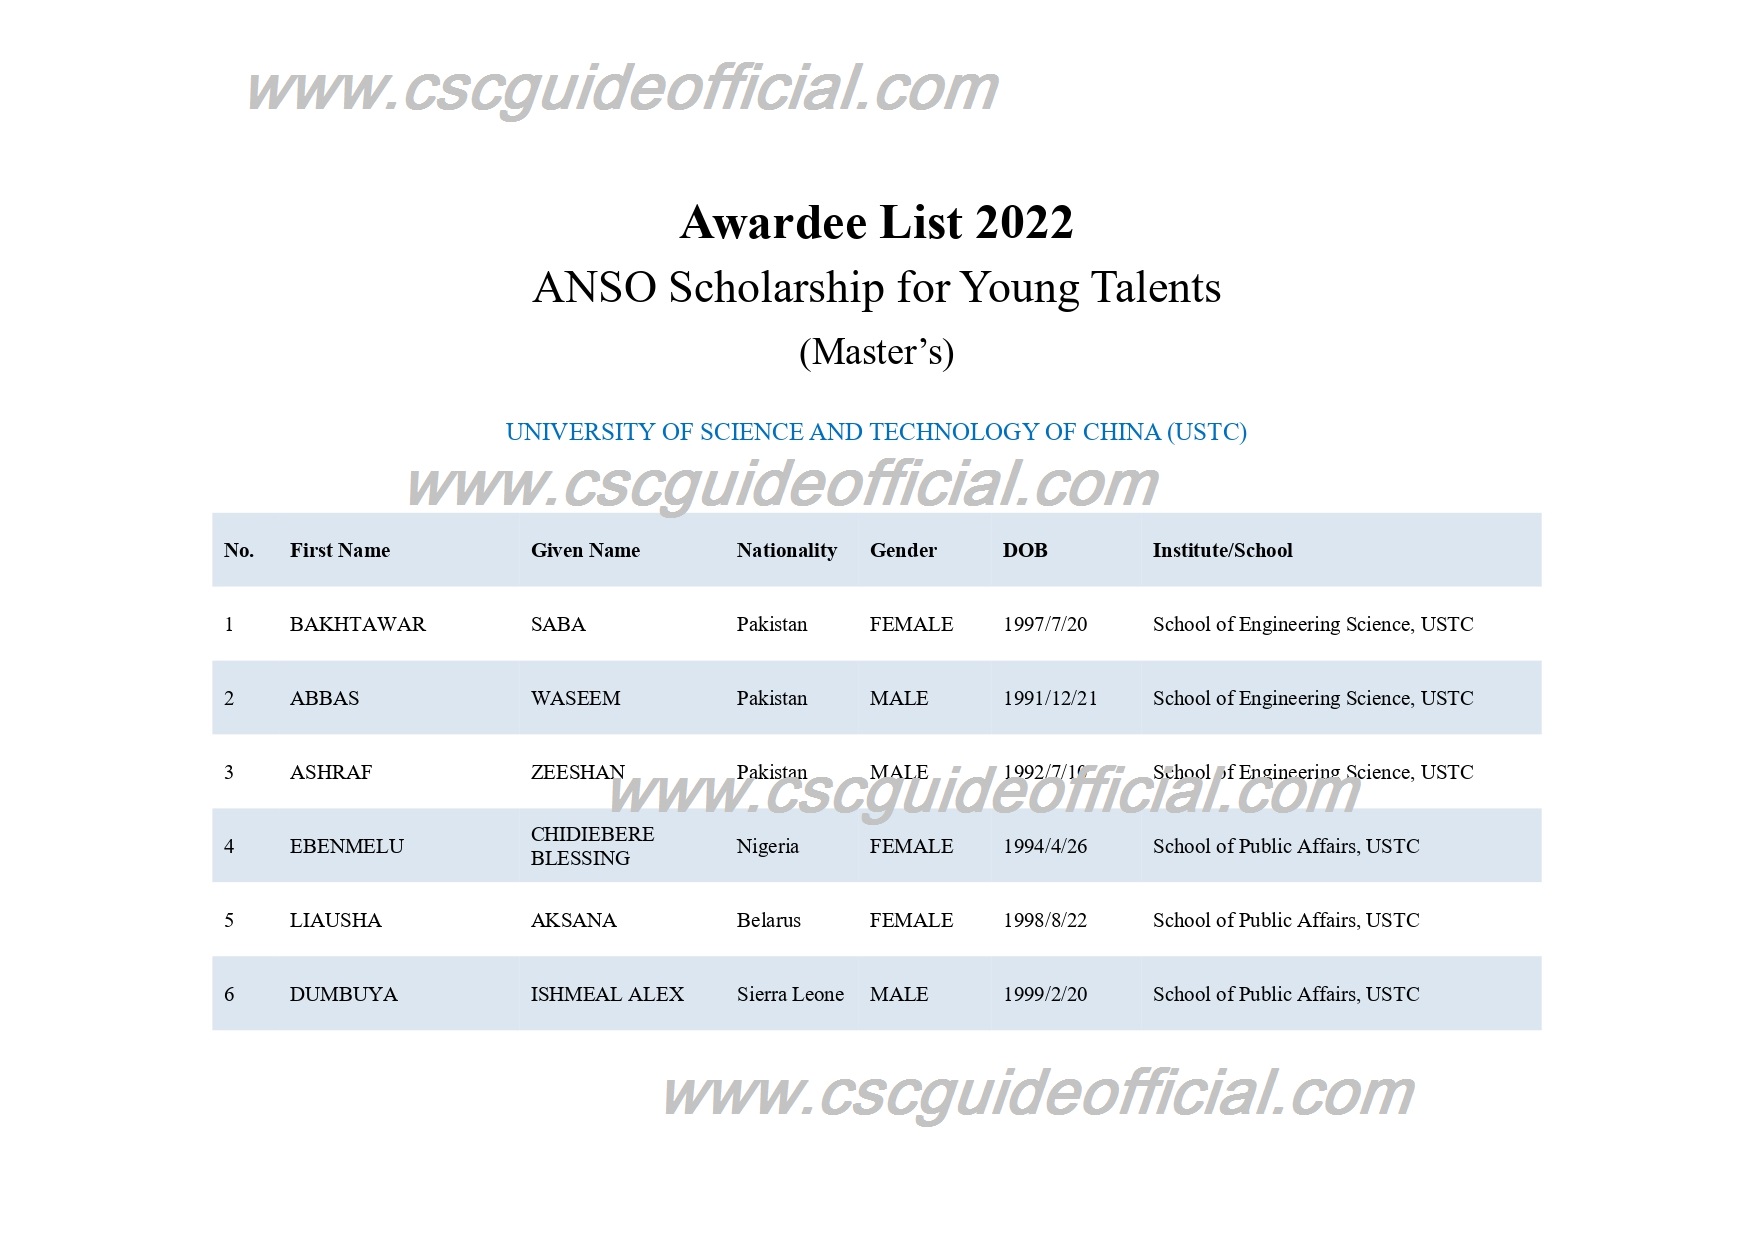 anso scholarship result for ustc 